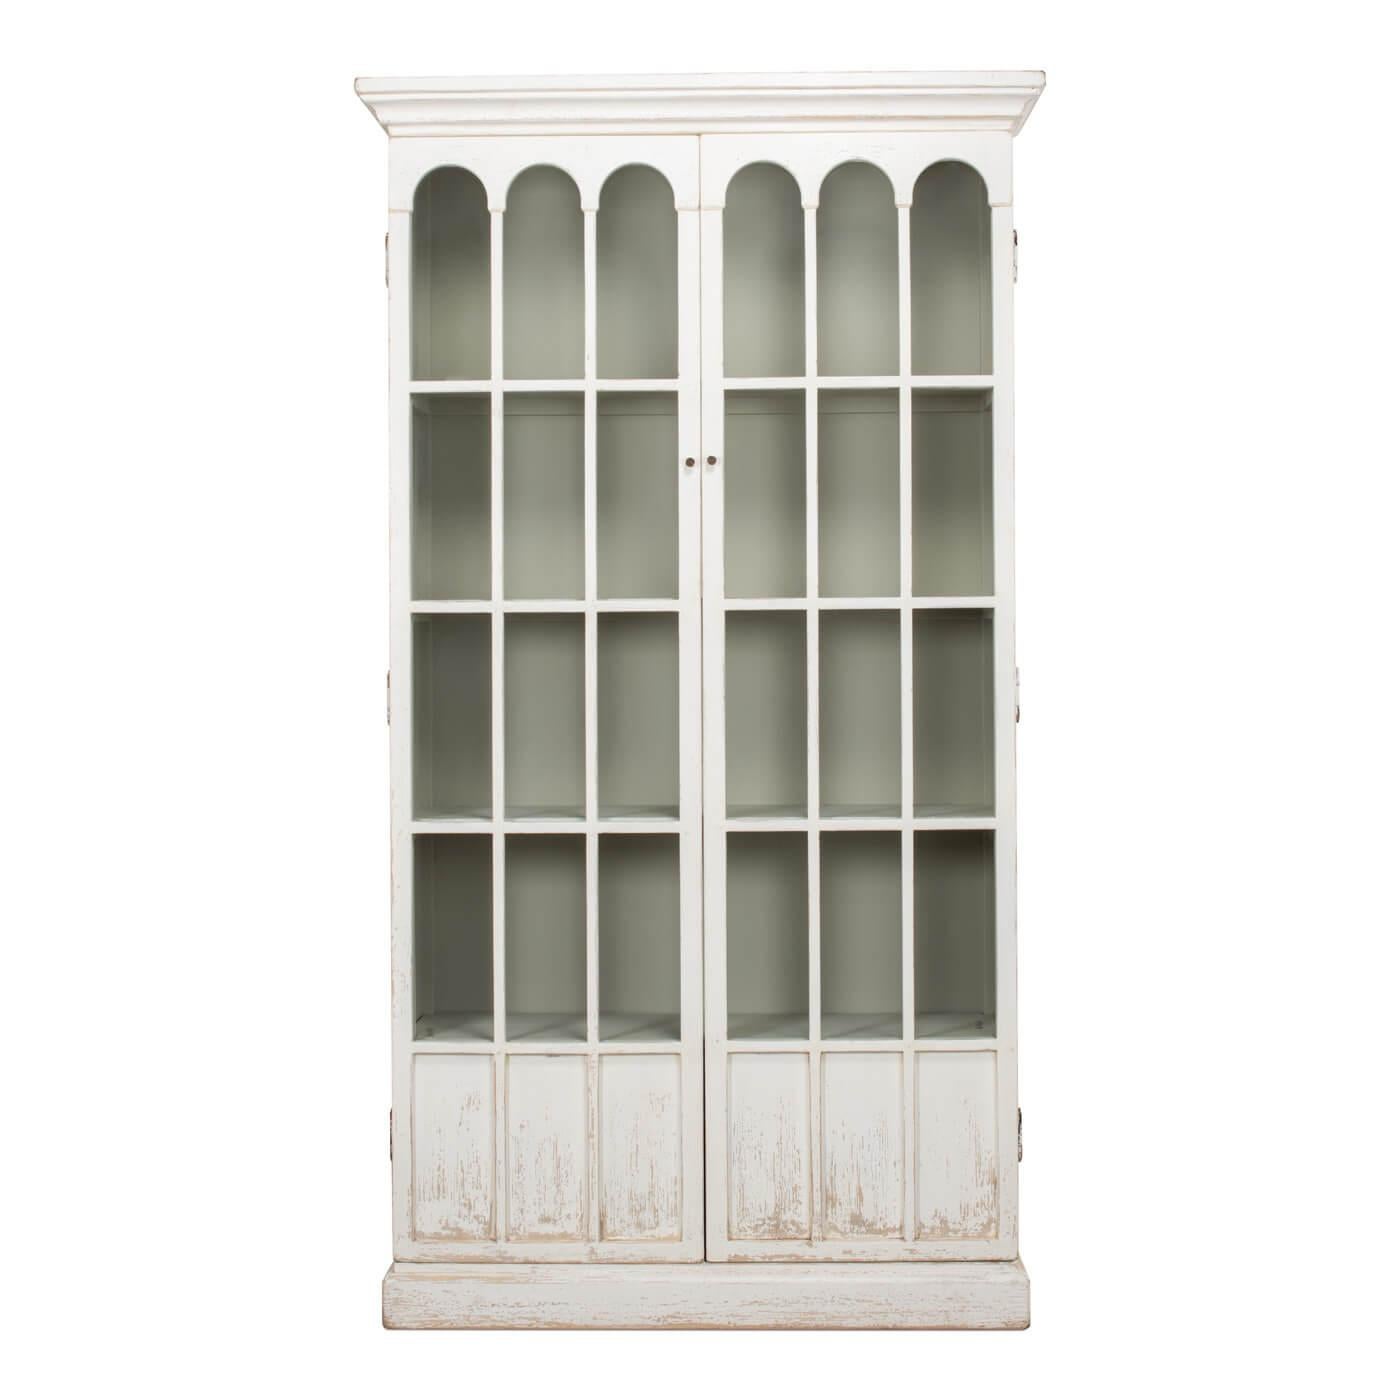 Rustic farmhouse style whitewashed bookcase with decorative glass doors. A beautiful and functional book or display case. This piece has two doors with gothic era-inspired arched glass panels. This case has four adjustable shelves. 

Made of